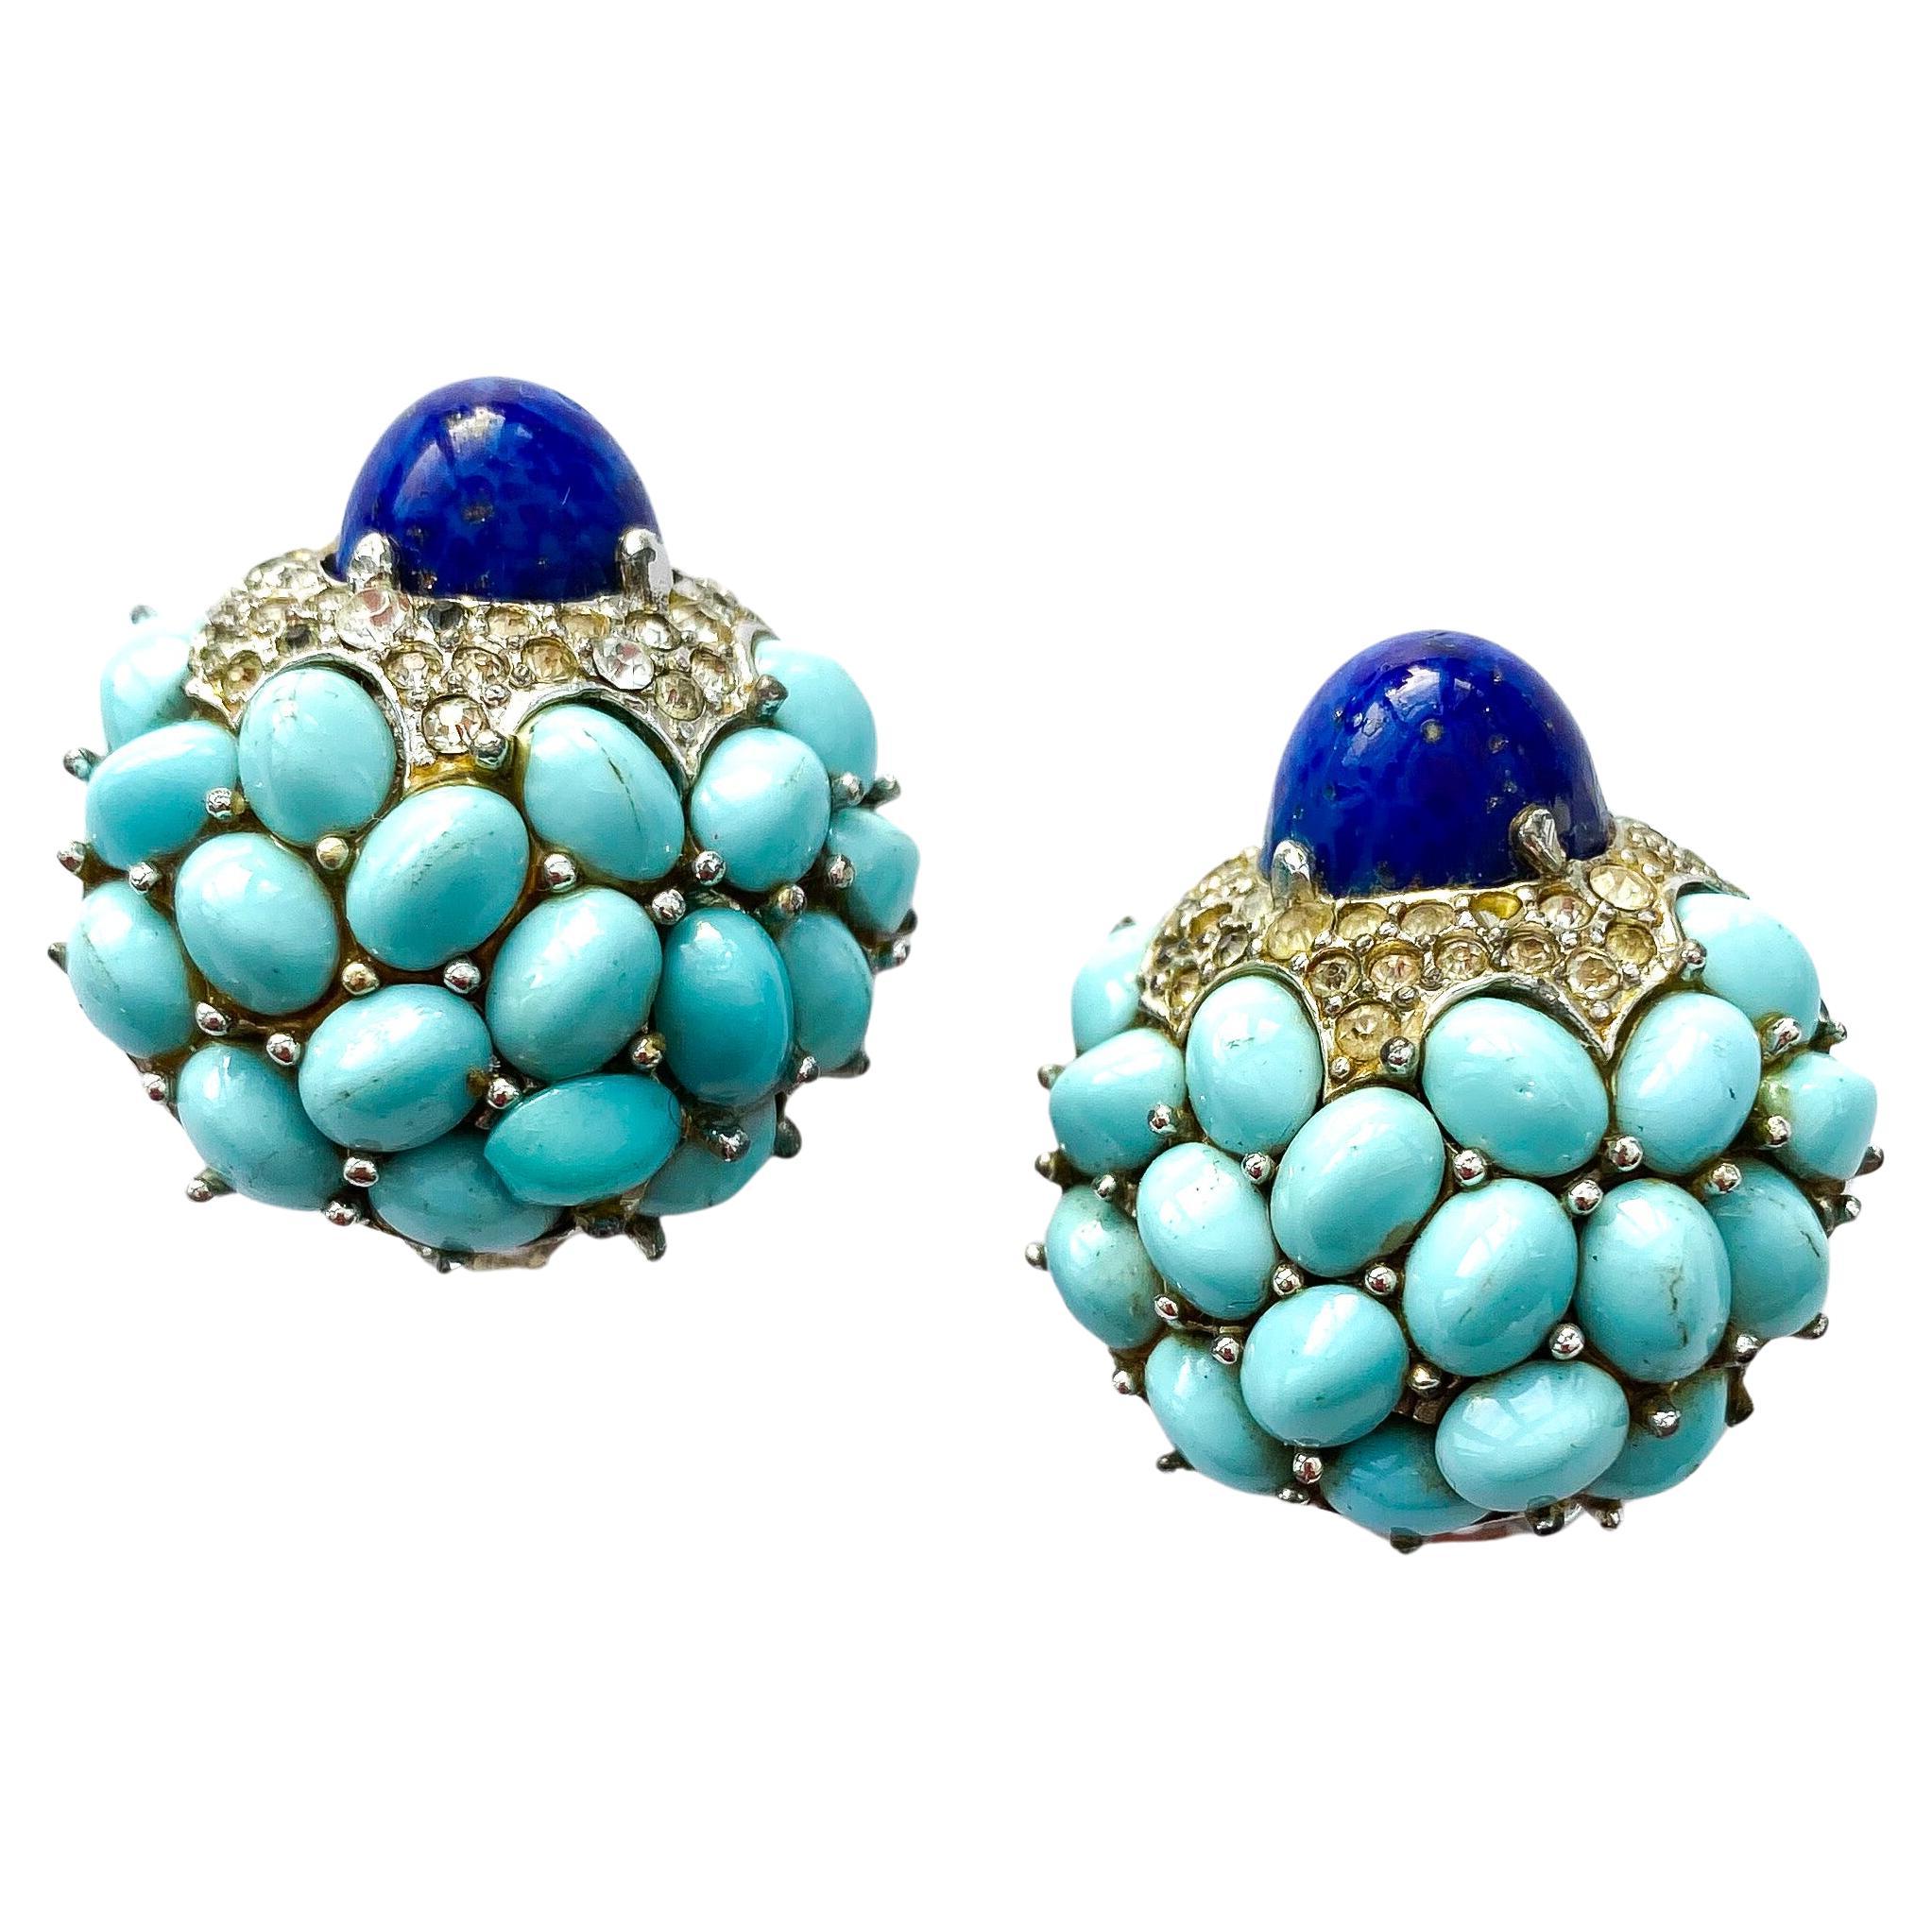 A pair of turquoise, lapis and clear paste earrings, Marcel Boucher, USA, 1960s.